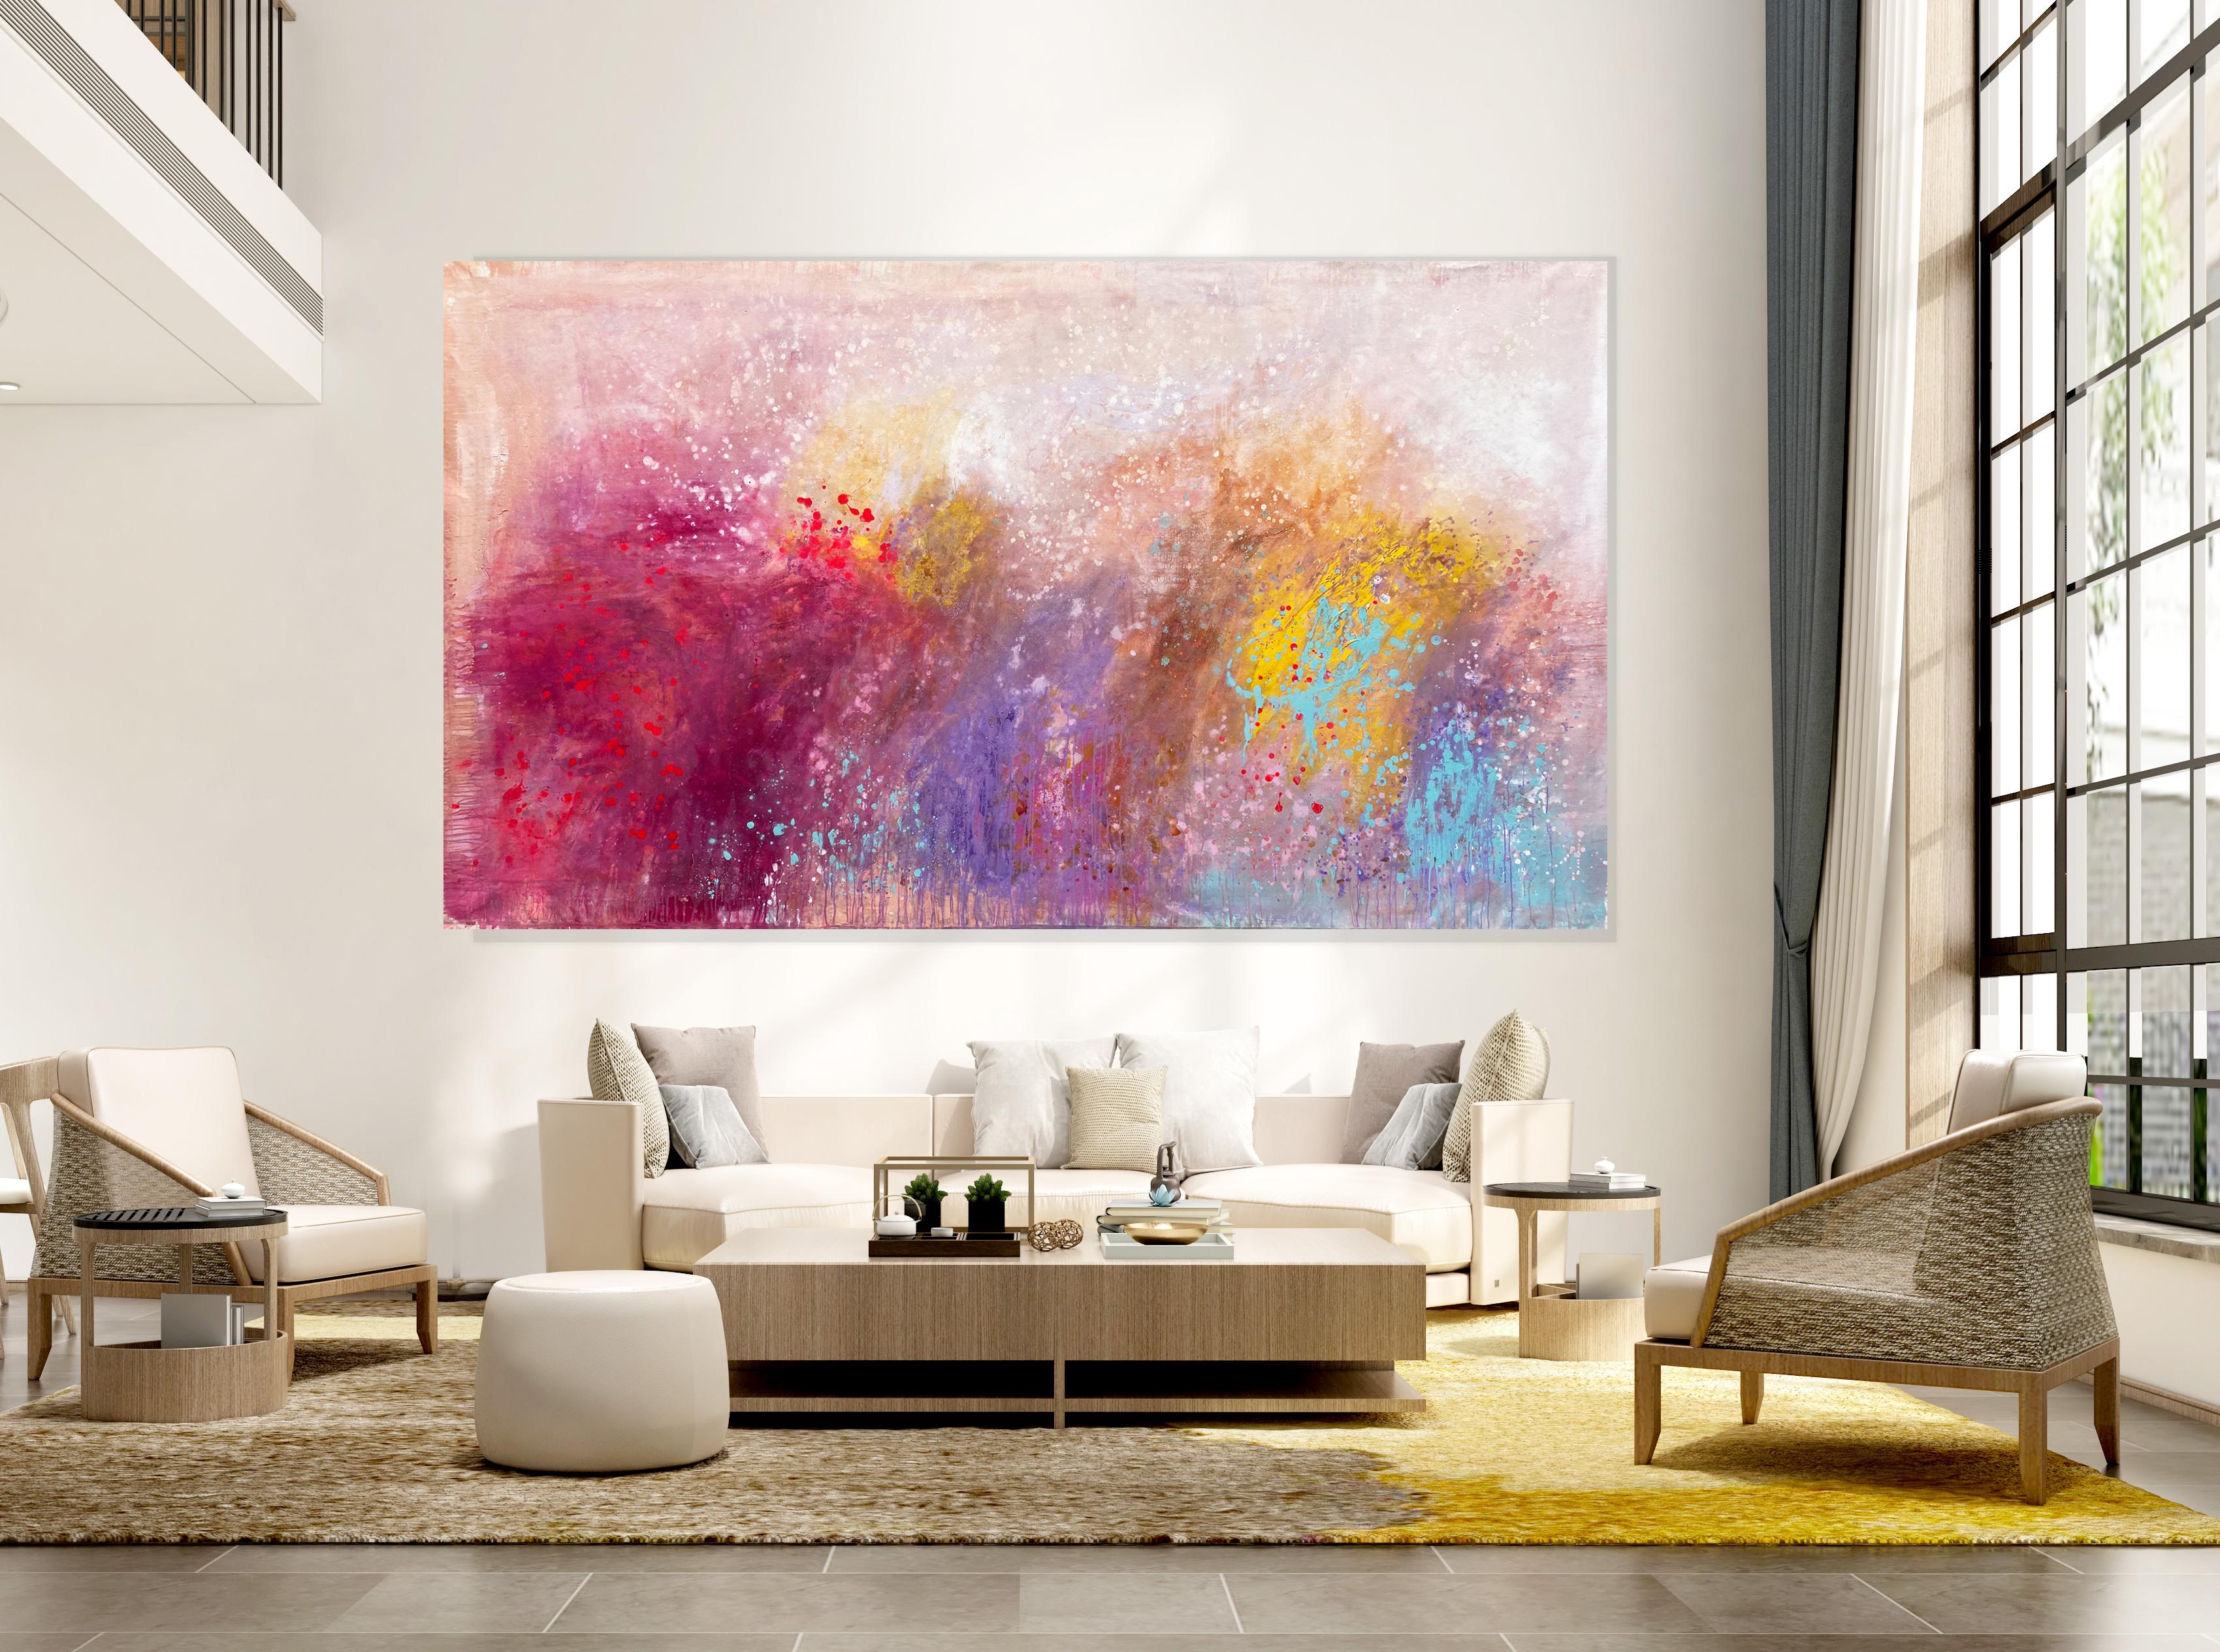 Dancing Sunlight large statement piece abstract painting yellow magenta aqua - Painting by Kathleen Rhee